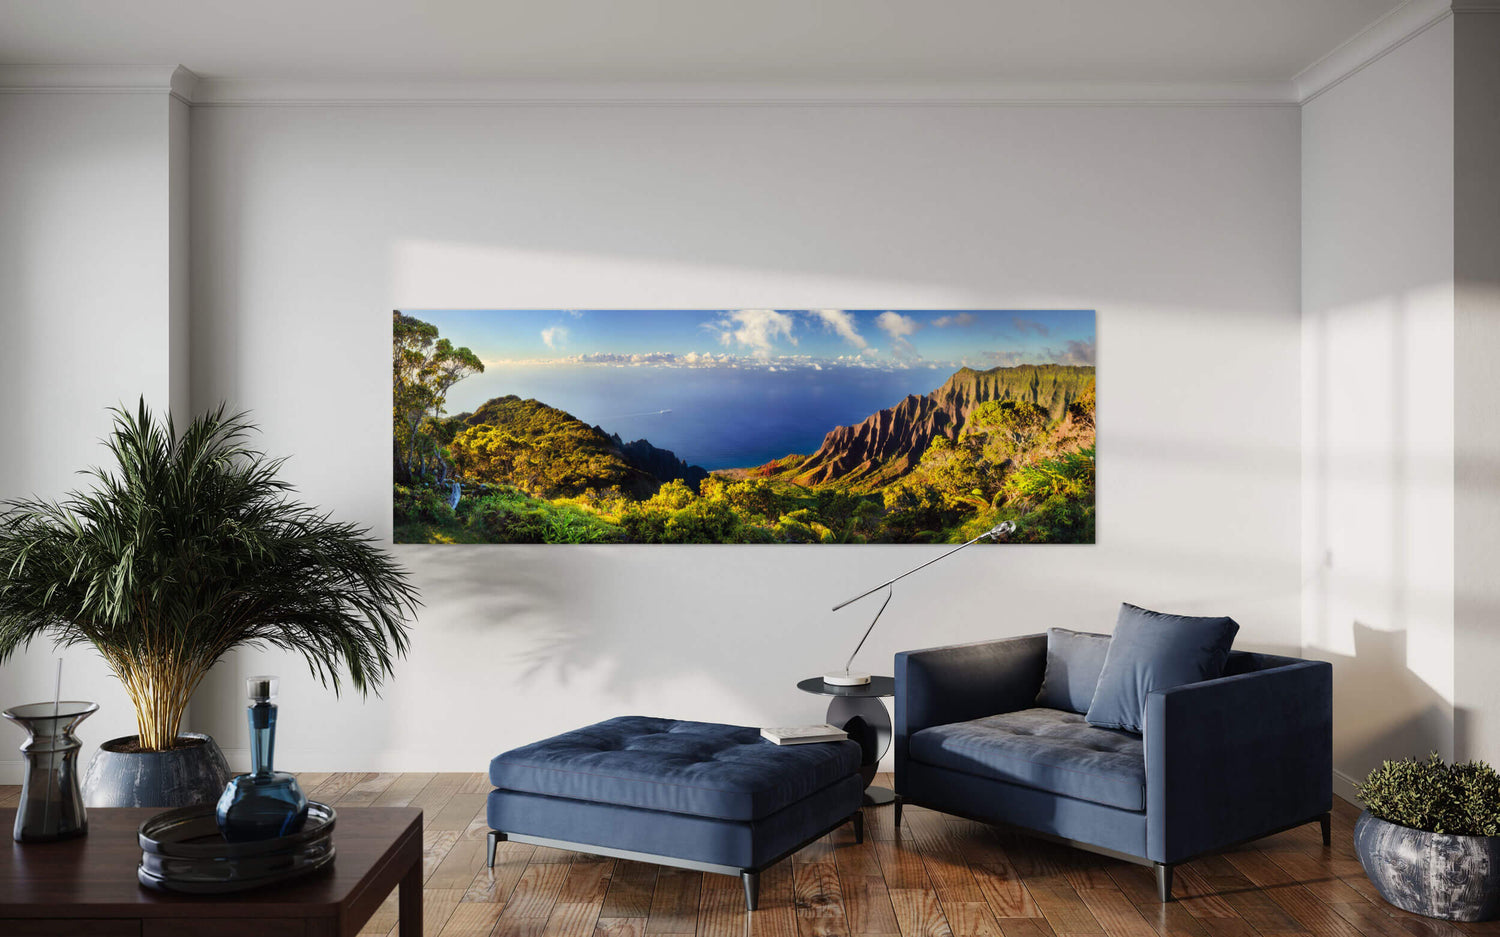 A Napali Coast picture shows the Kalalau Valley on Kauai in Hawaii hangs in a living room.